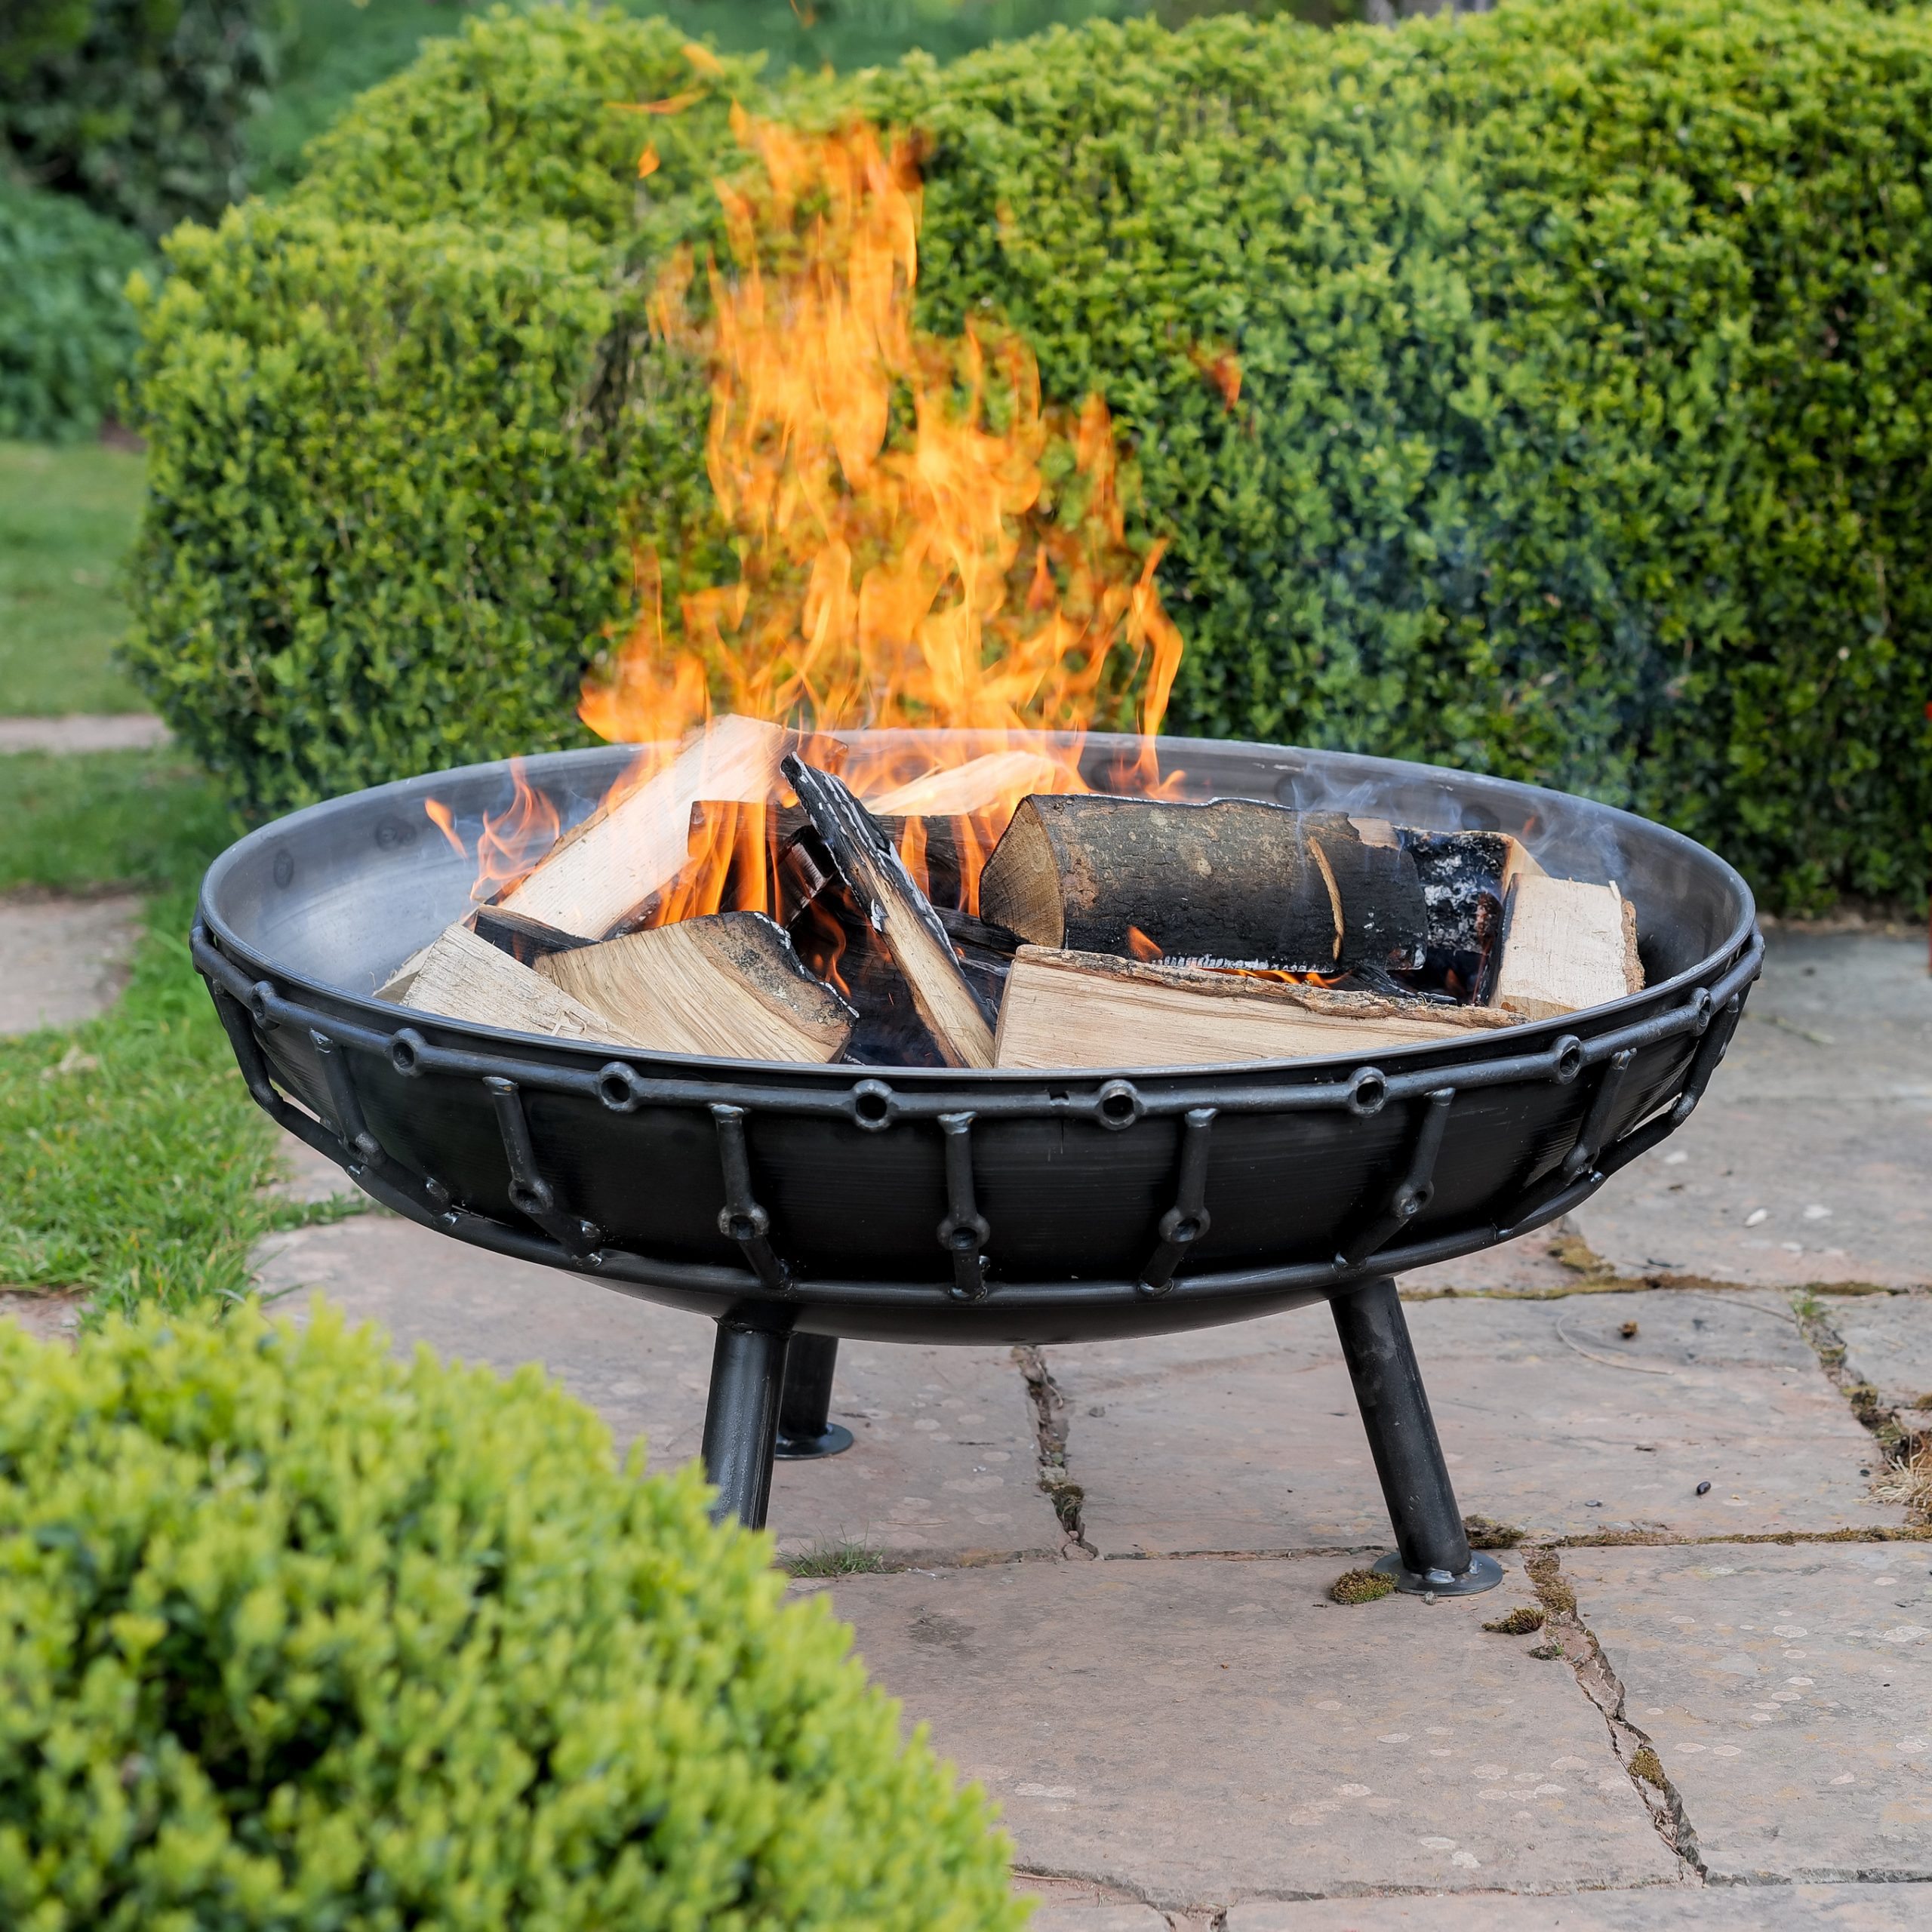 20Kg Fire Pit Logs Thinner and Hotter Burning for Less Smoke. Kiln Dried Hardwood Logs Suitable for Outdoor Fire Pits 